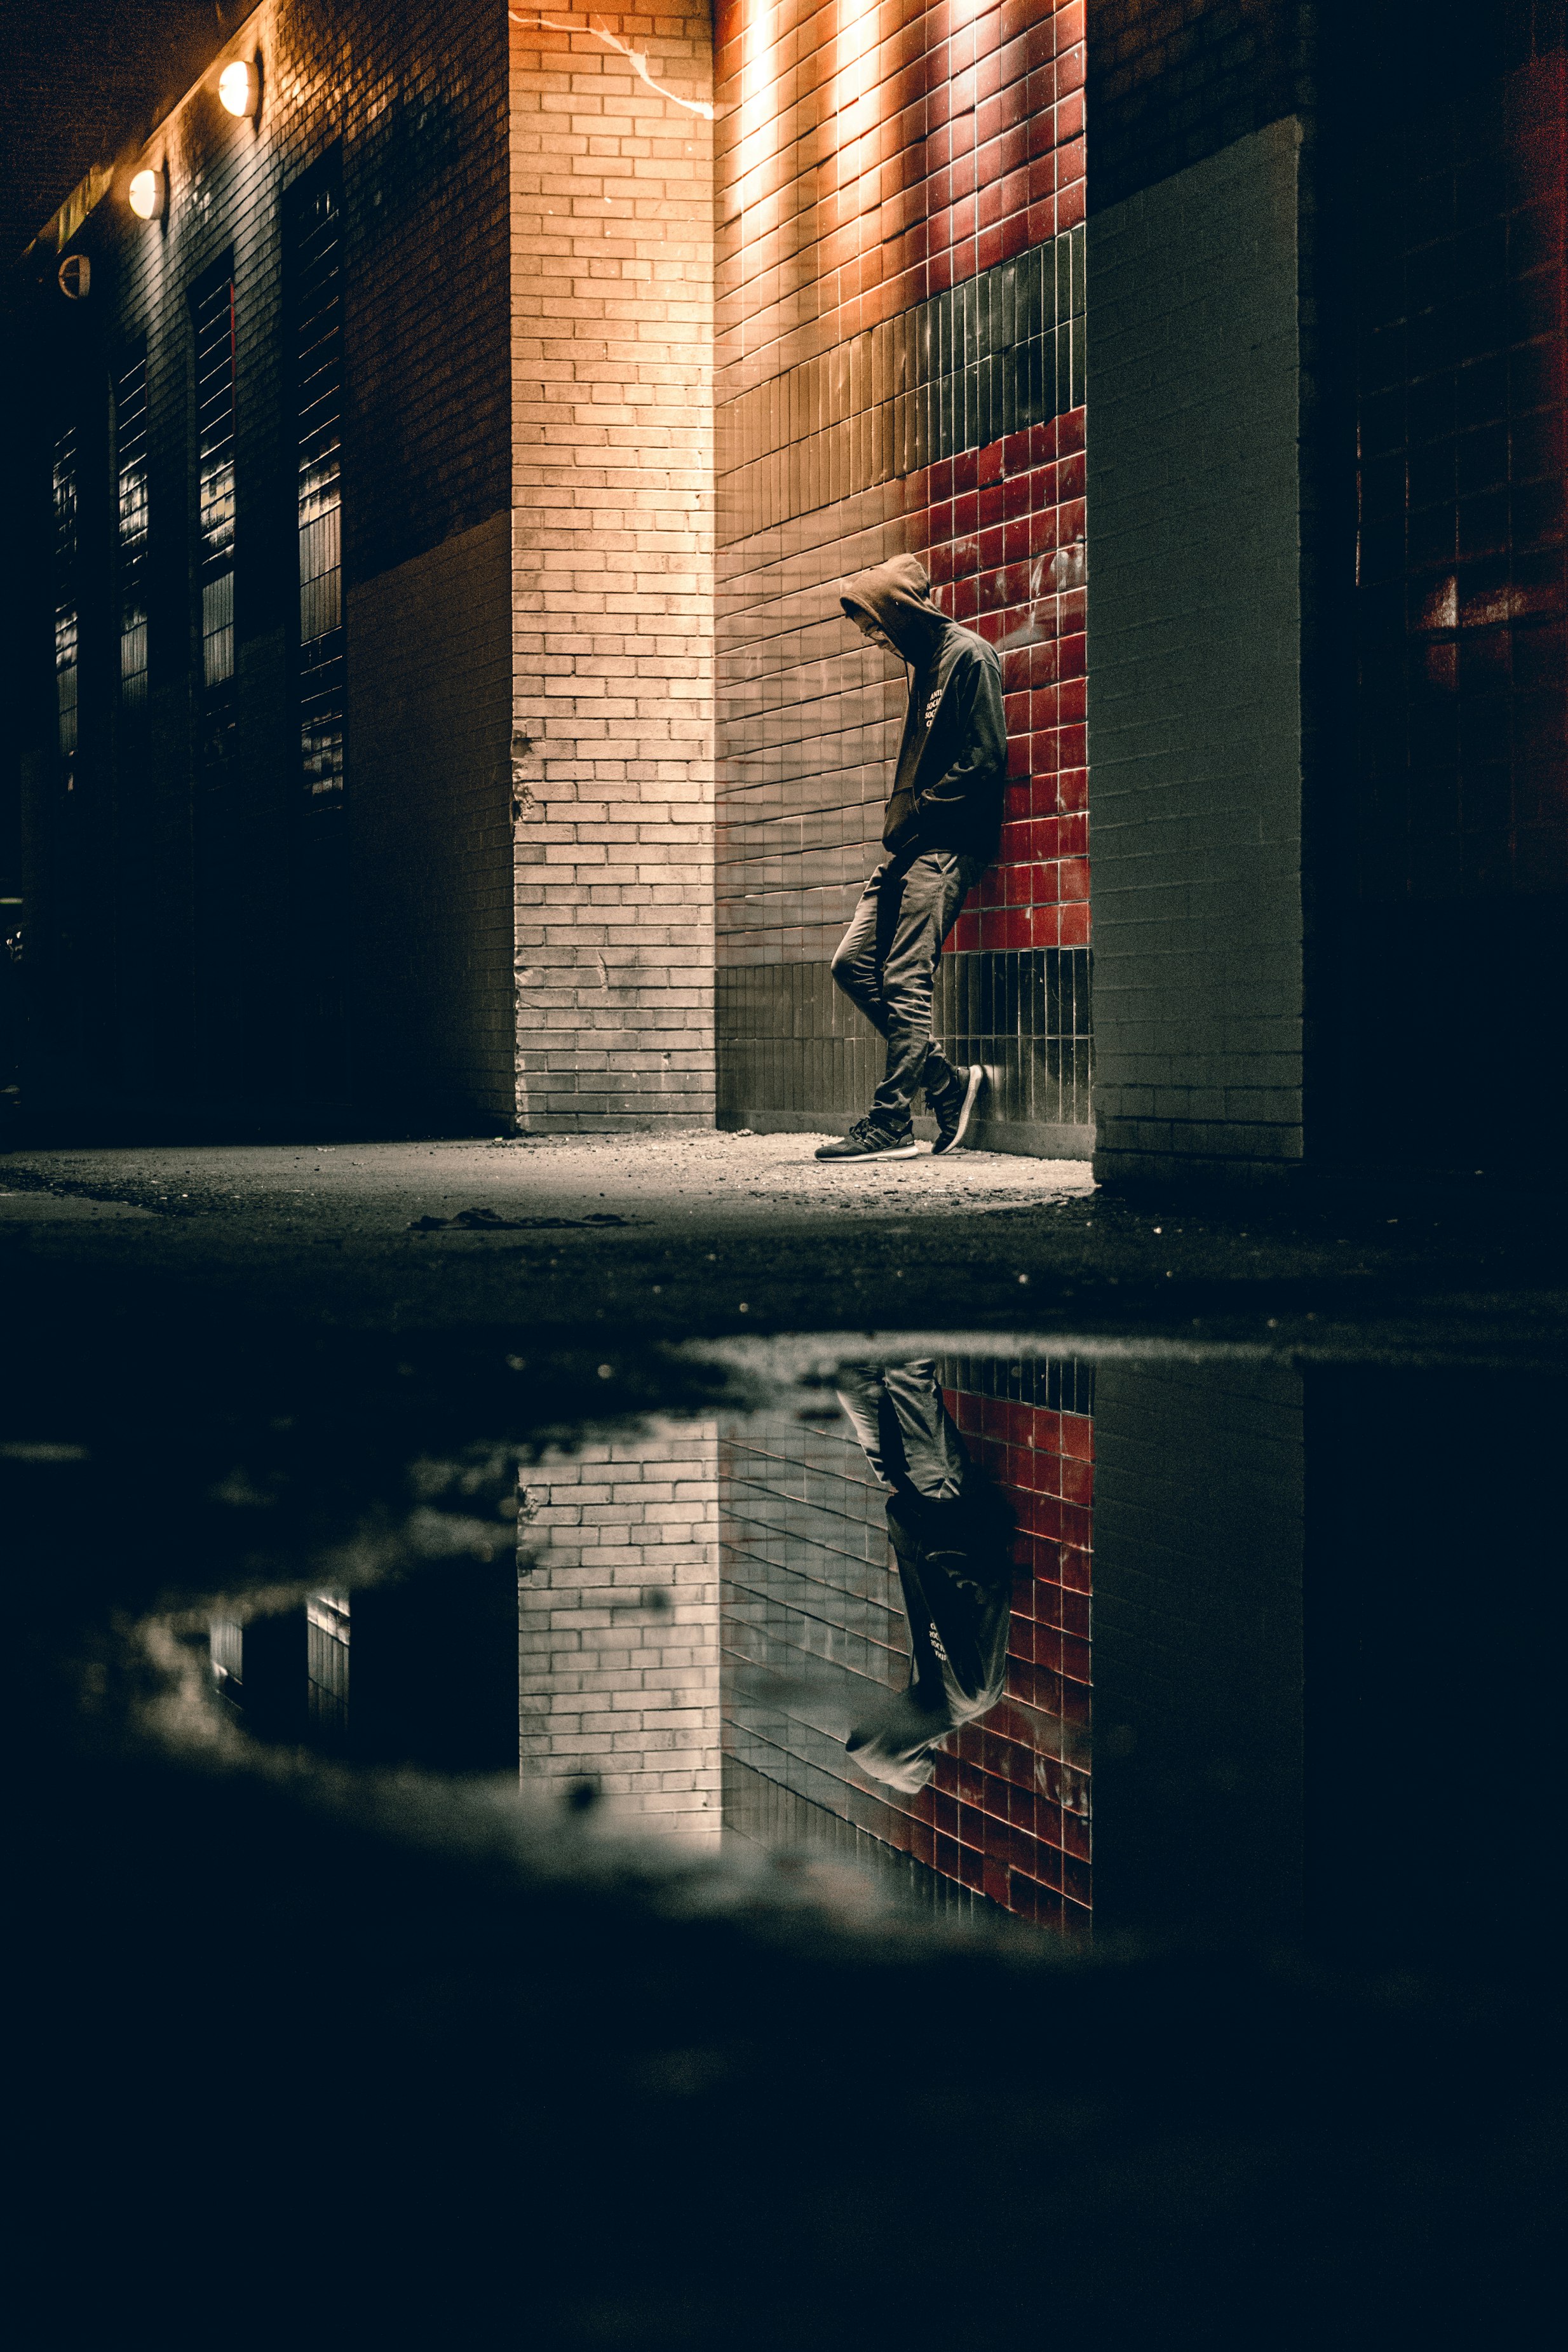 A photograph of a person leaning against a brick wall with their face covered by a hooded sweatshirt. In the foreground is a puddle that reflects the person.